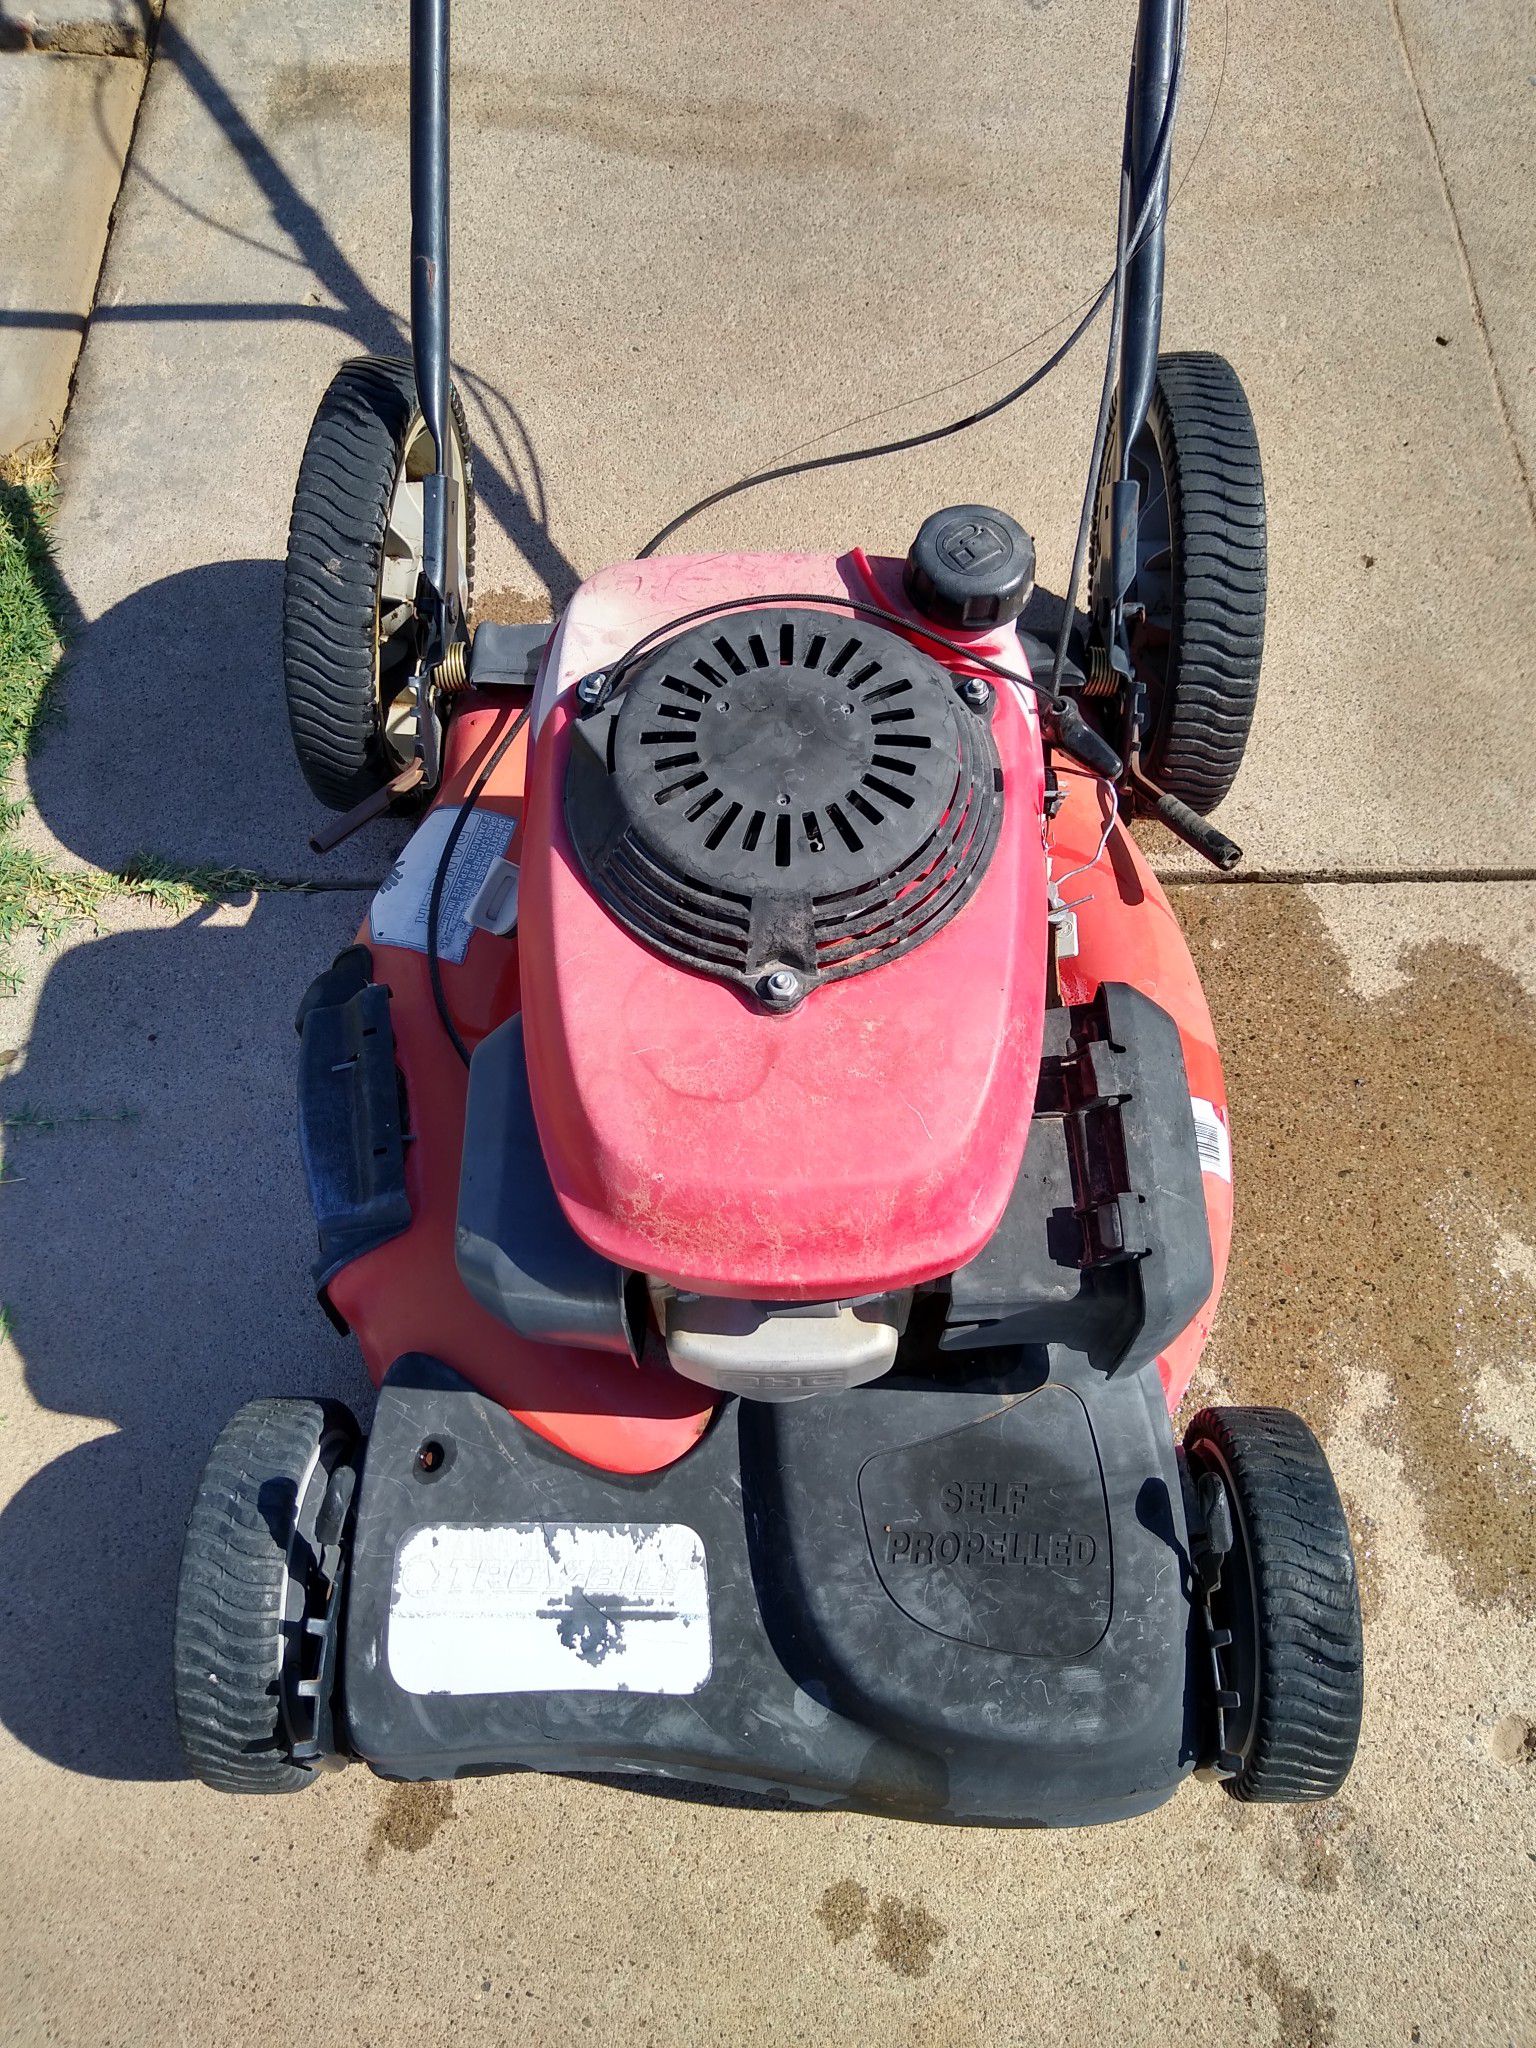 Troy-Bilt Honda powered self-propelled gas lawn mower runs great from the first pull needs some cables and a wheel as is needs work